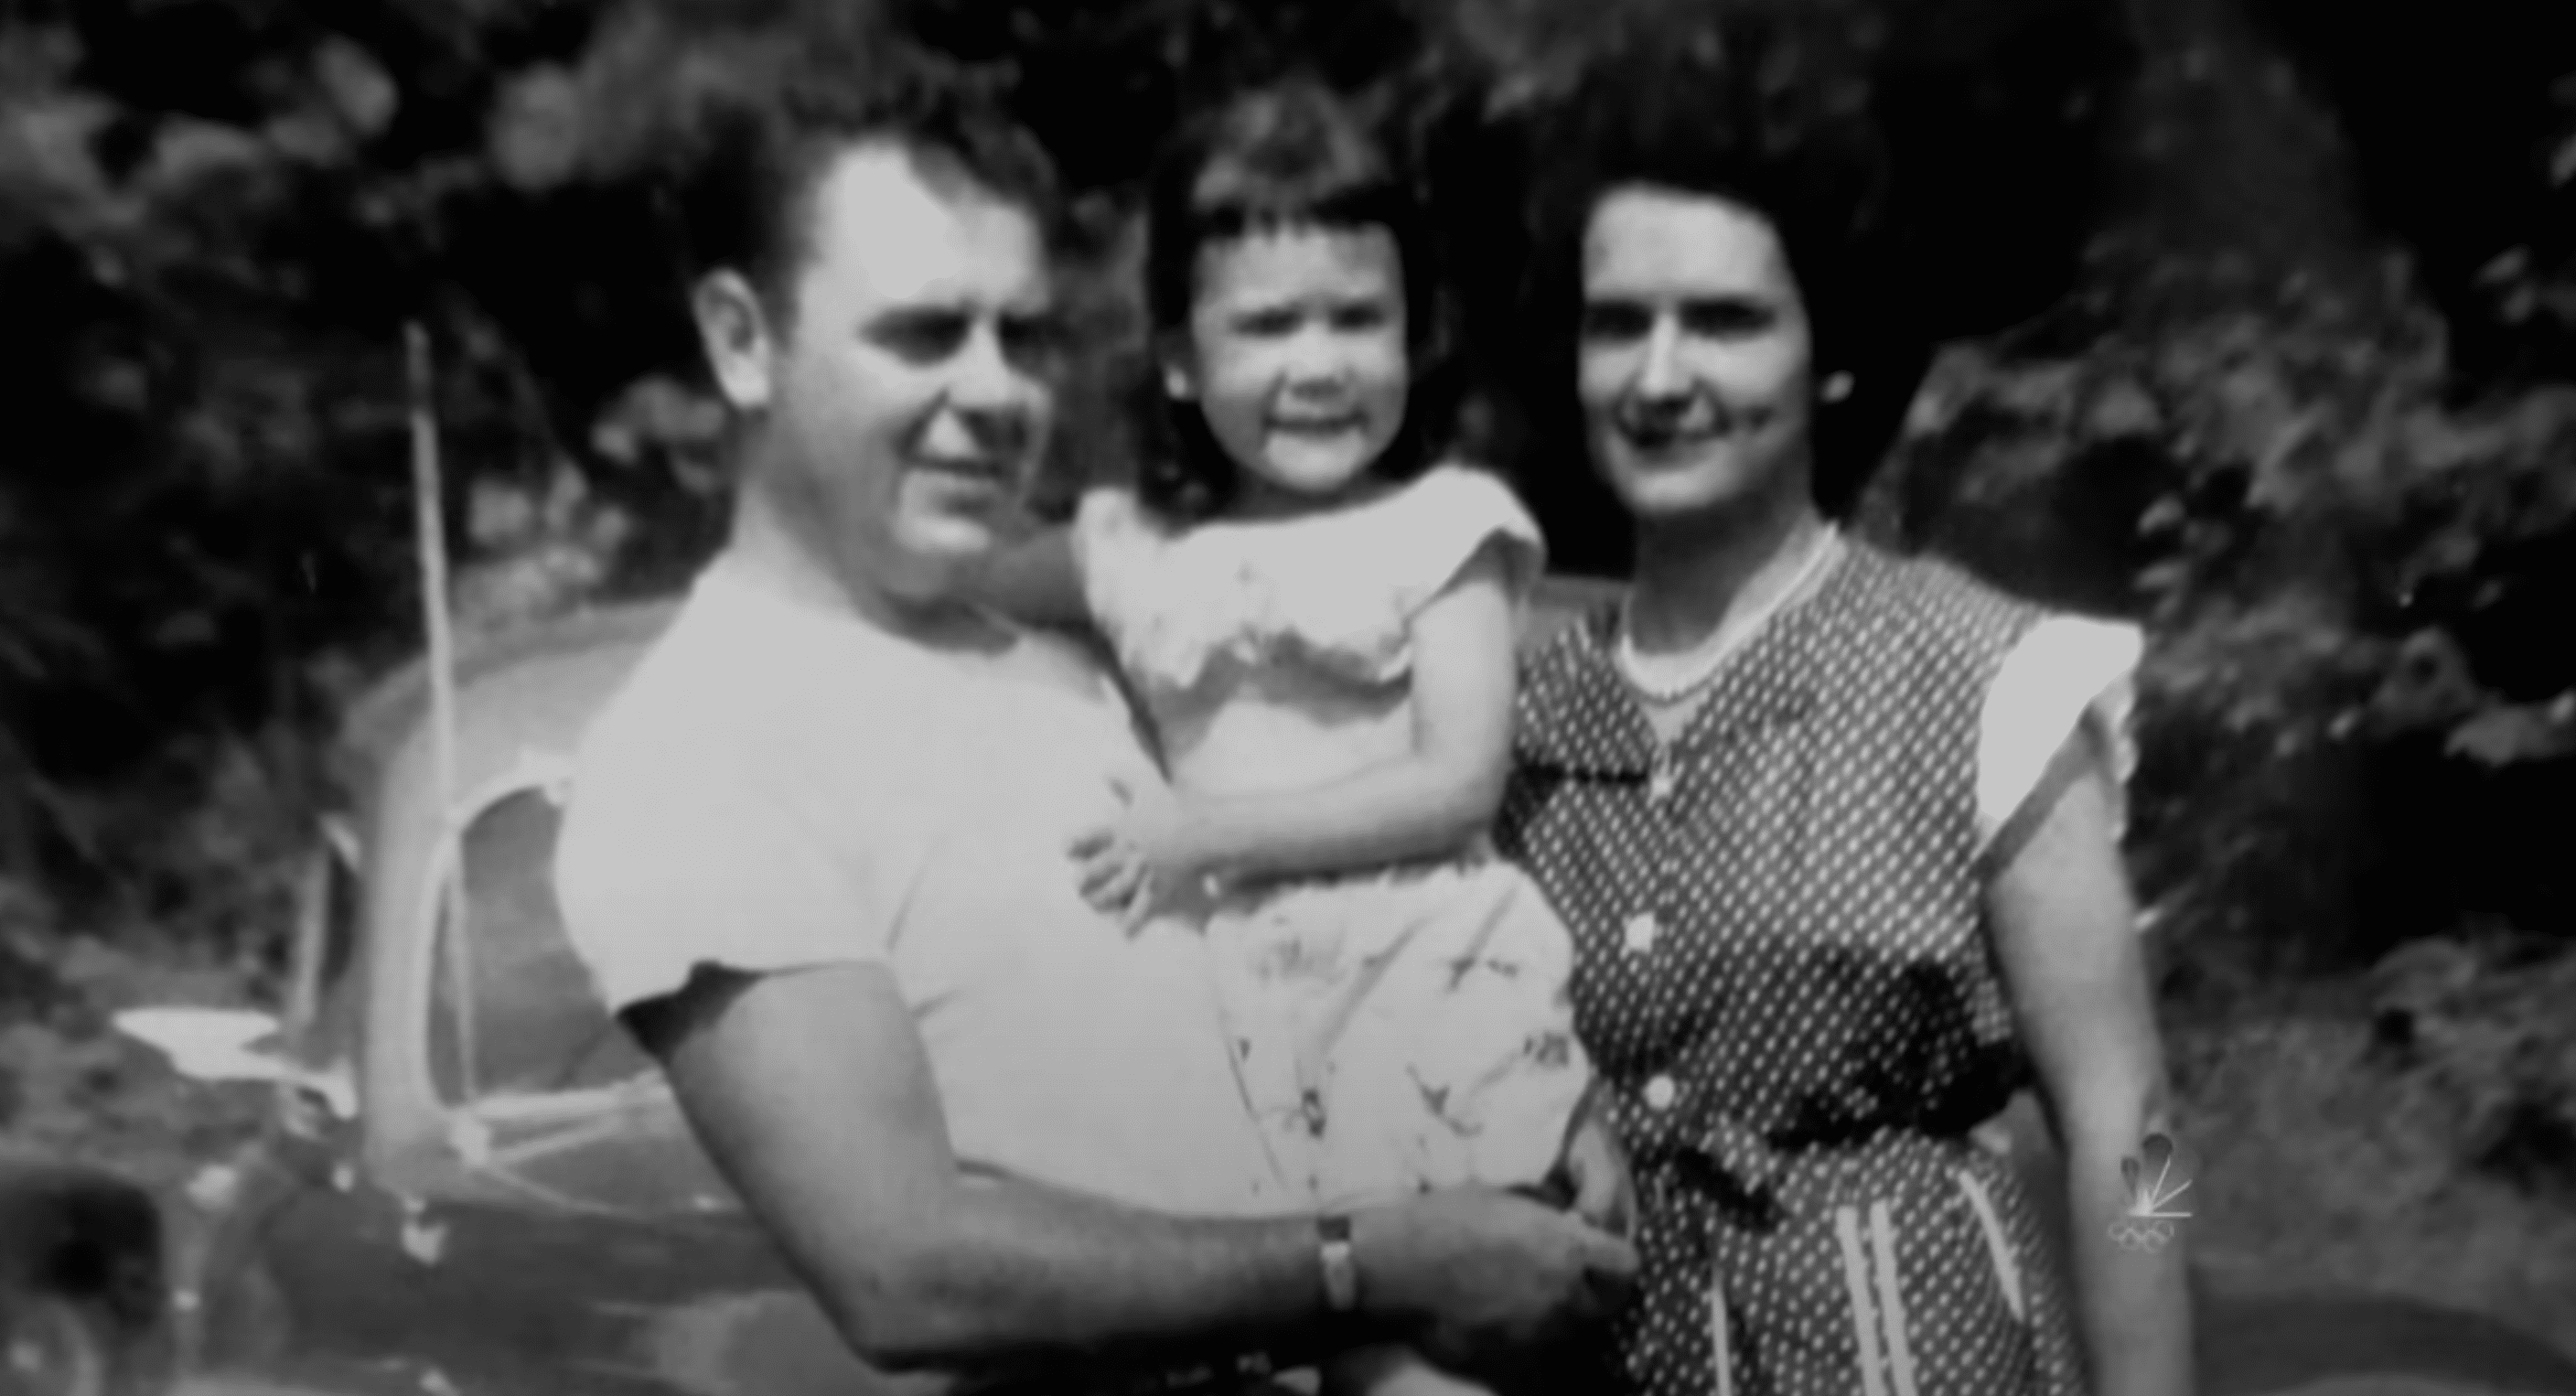 Gail Lukasik pictured as a baby with her parents, Harold Kalina and Alvera Frederic. | Source: YouTube.com/TODAY